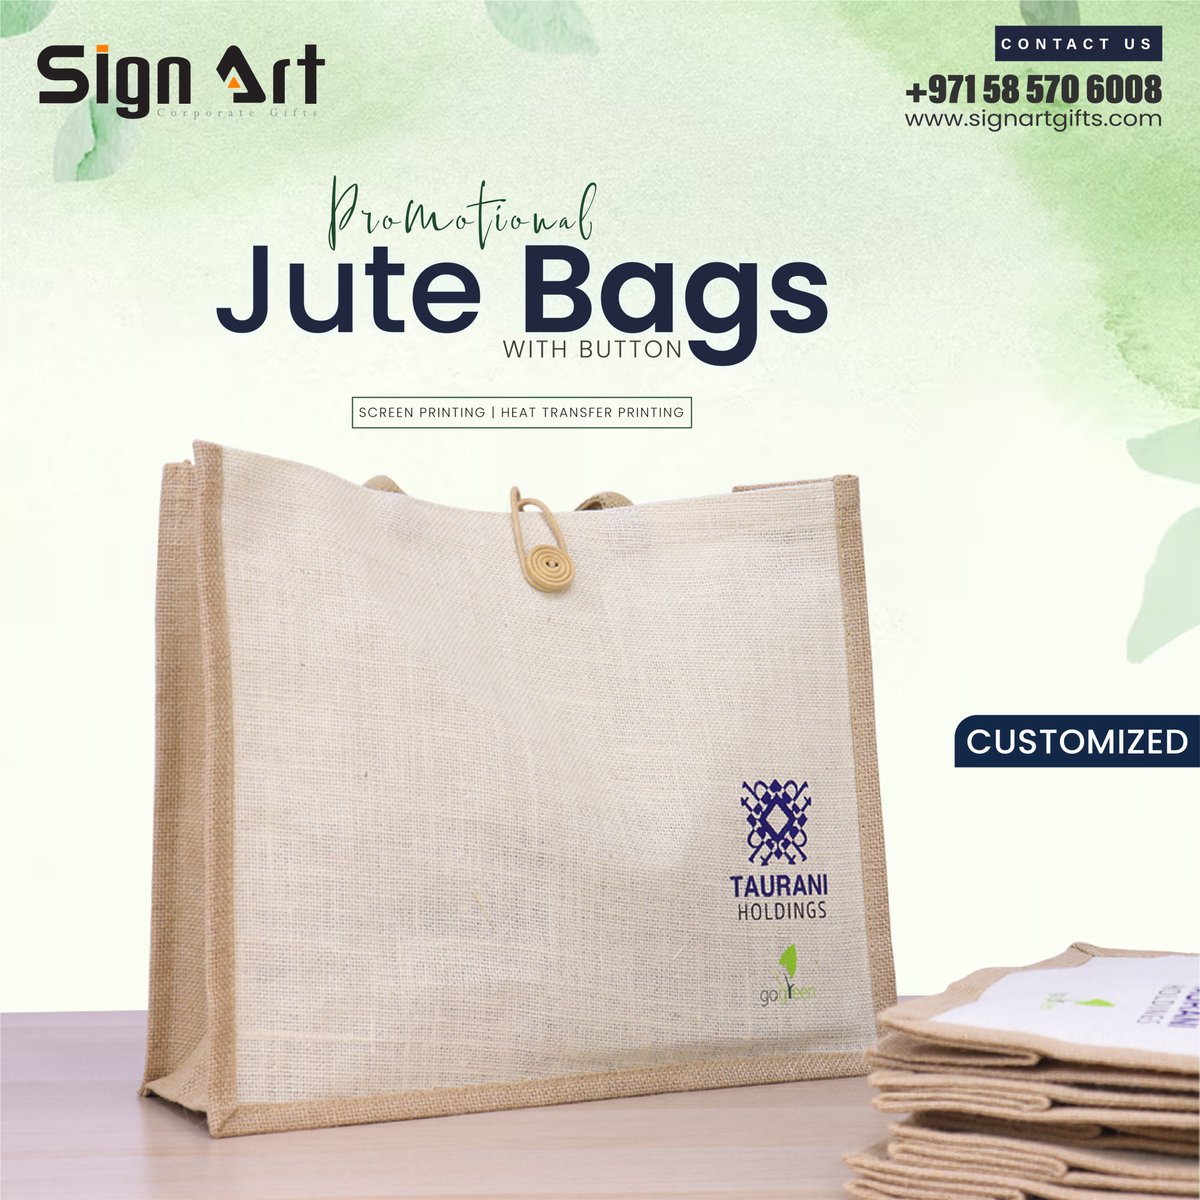 Promotional Jute Bags with Button
WhatsApp: 058 570 6008

Learn more: signartgifts.com

#customized #customizedgifts #promotionalproducts #jutebag #corporategifts #customizedgifts #judebag #ecofriendlybags #eventgifts #officebranding #printingservices #dubaiprinting